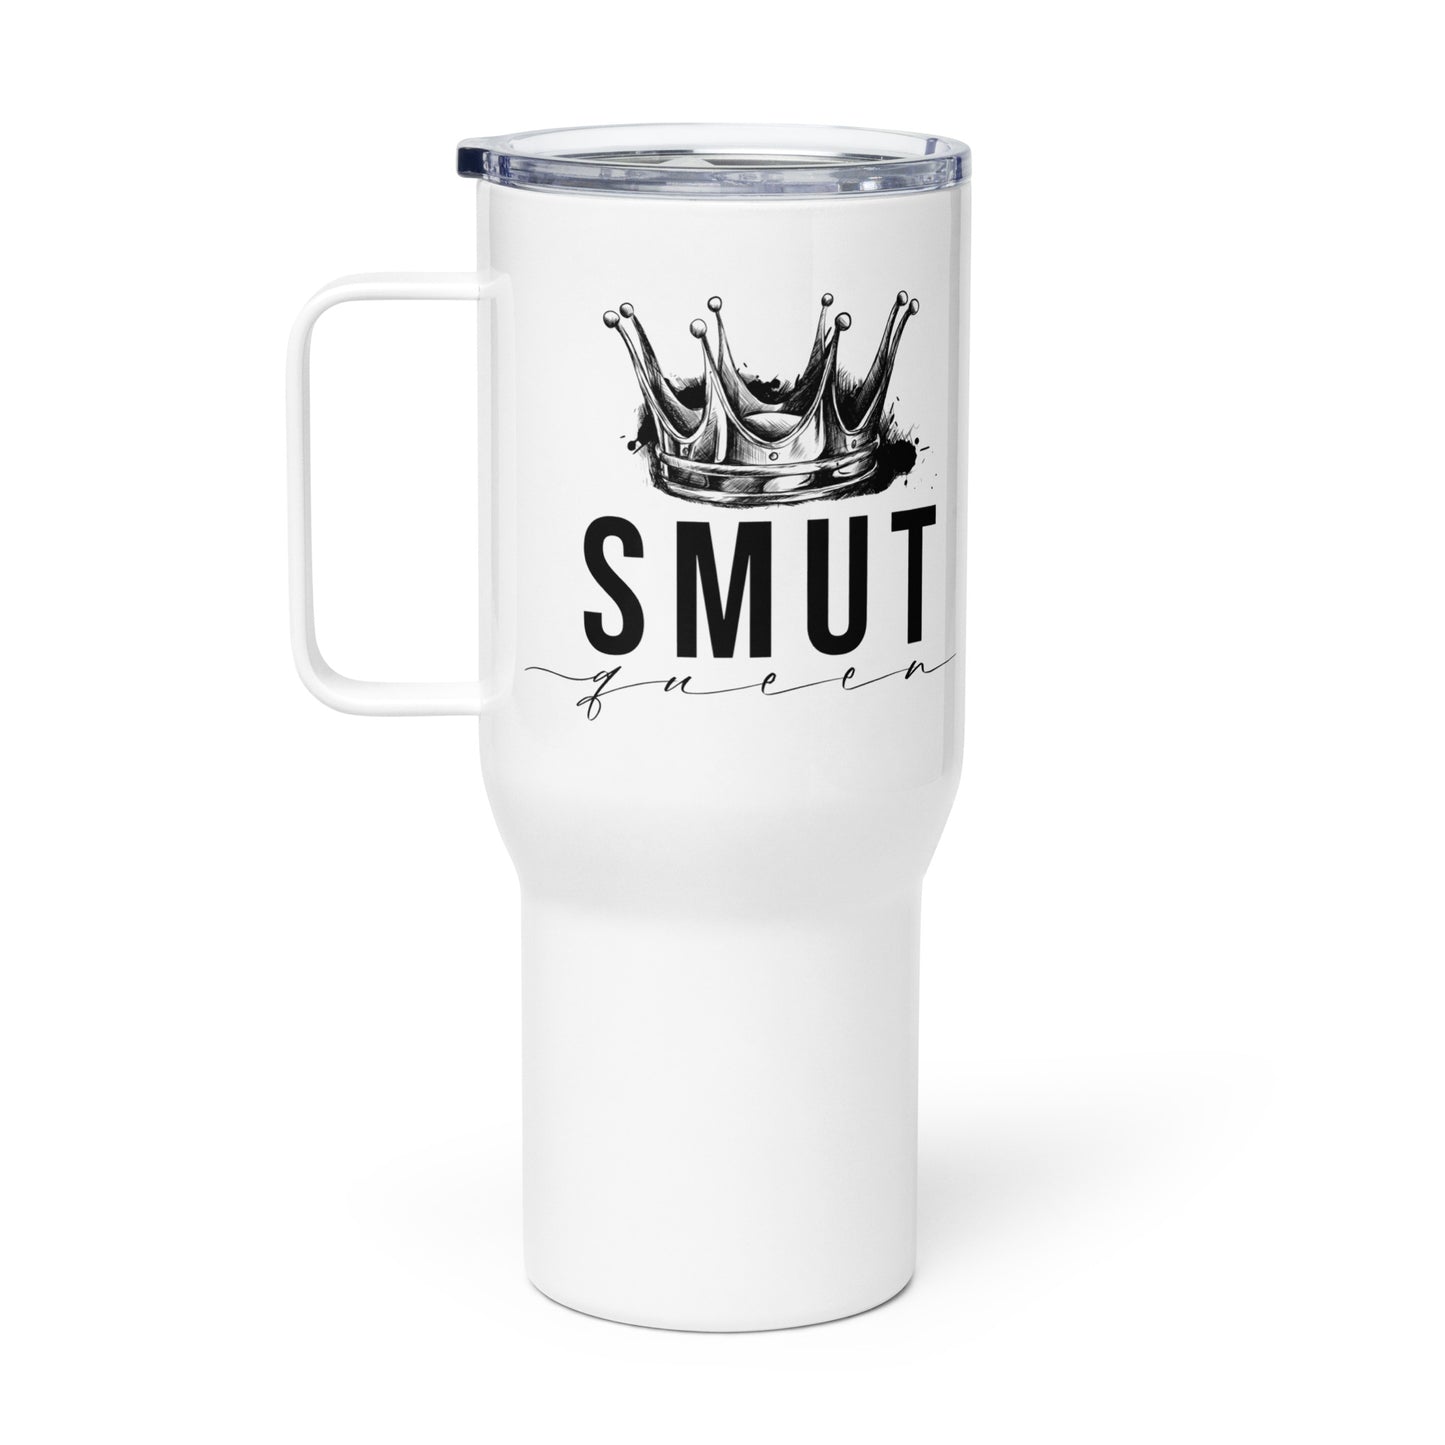 Smut Queen Travel mug with a handle